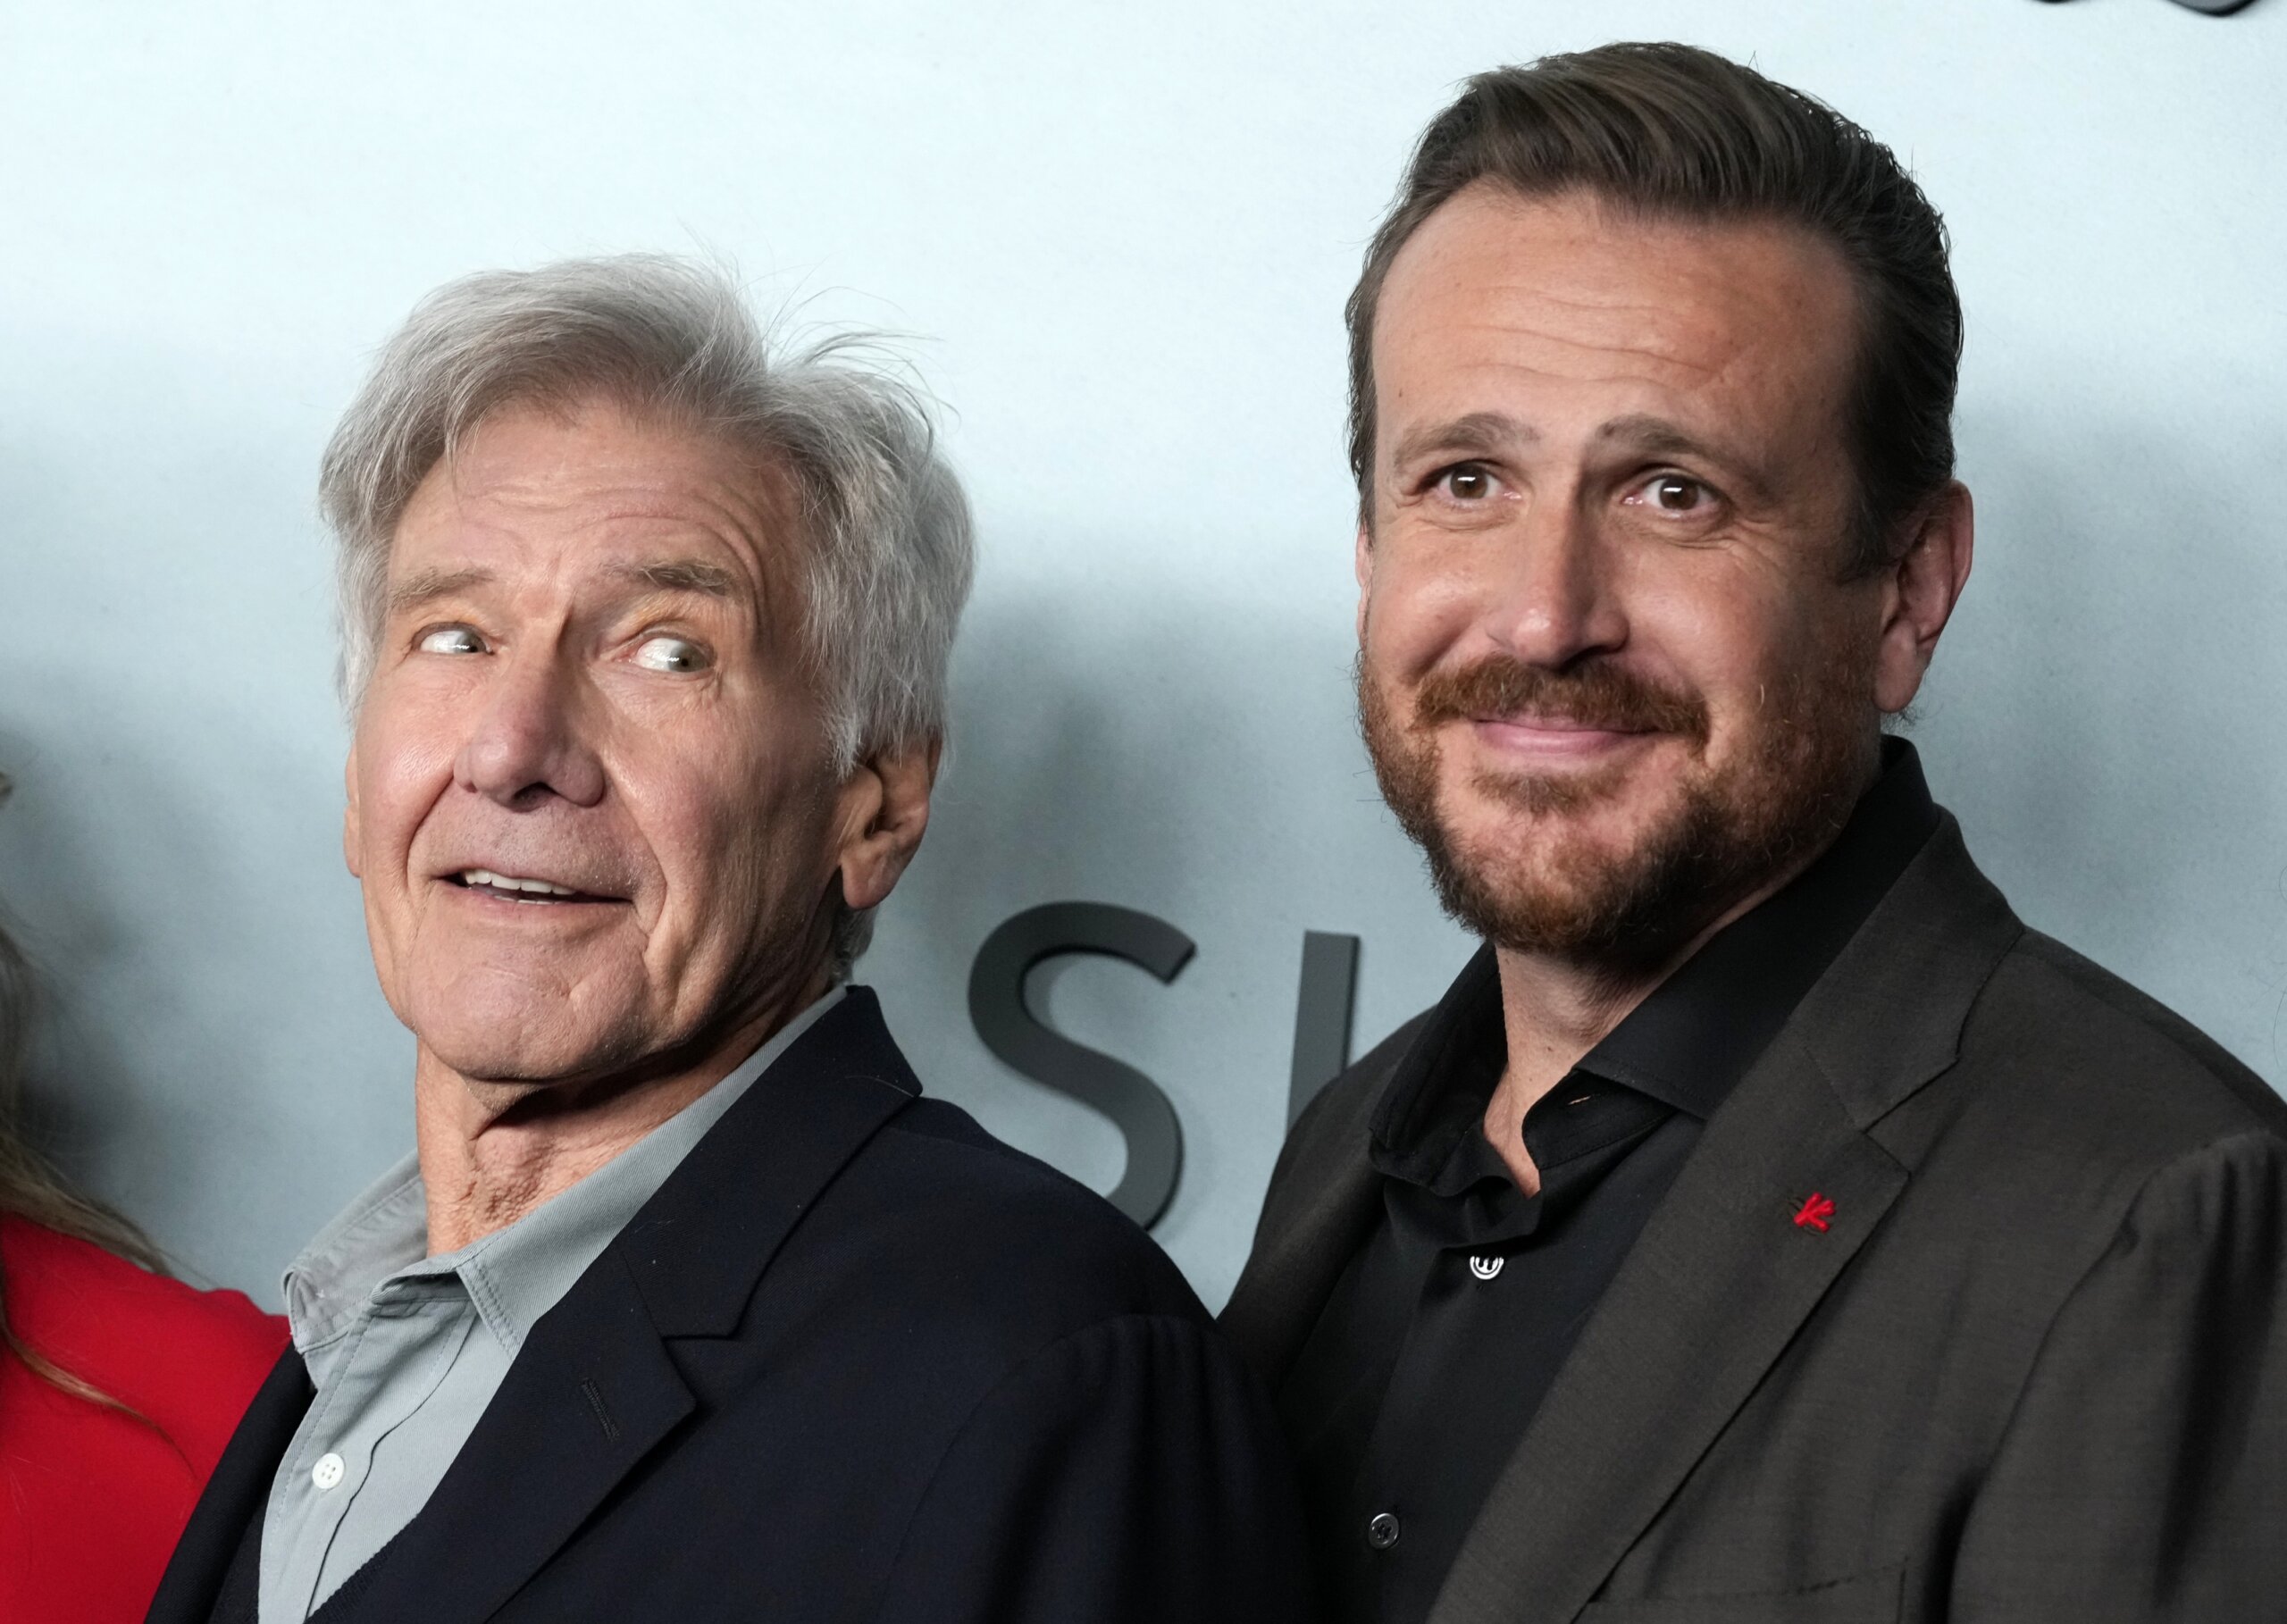 Harrison Ford inspires cast in new comedy ‘Shrinking’